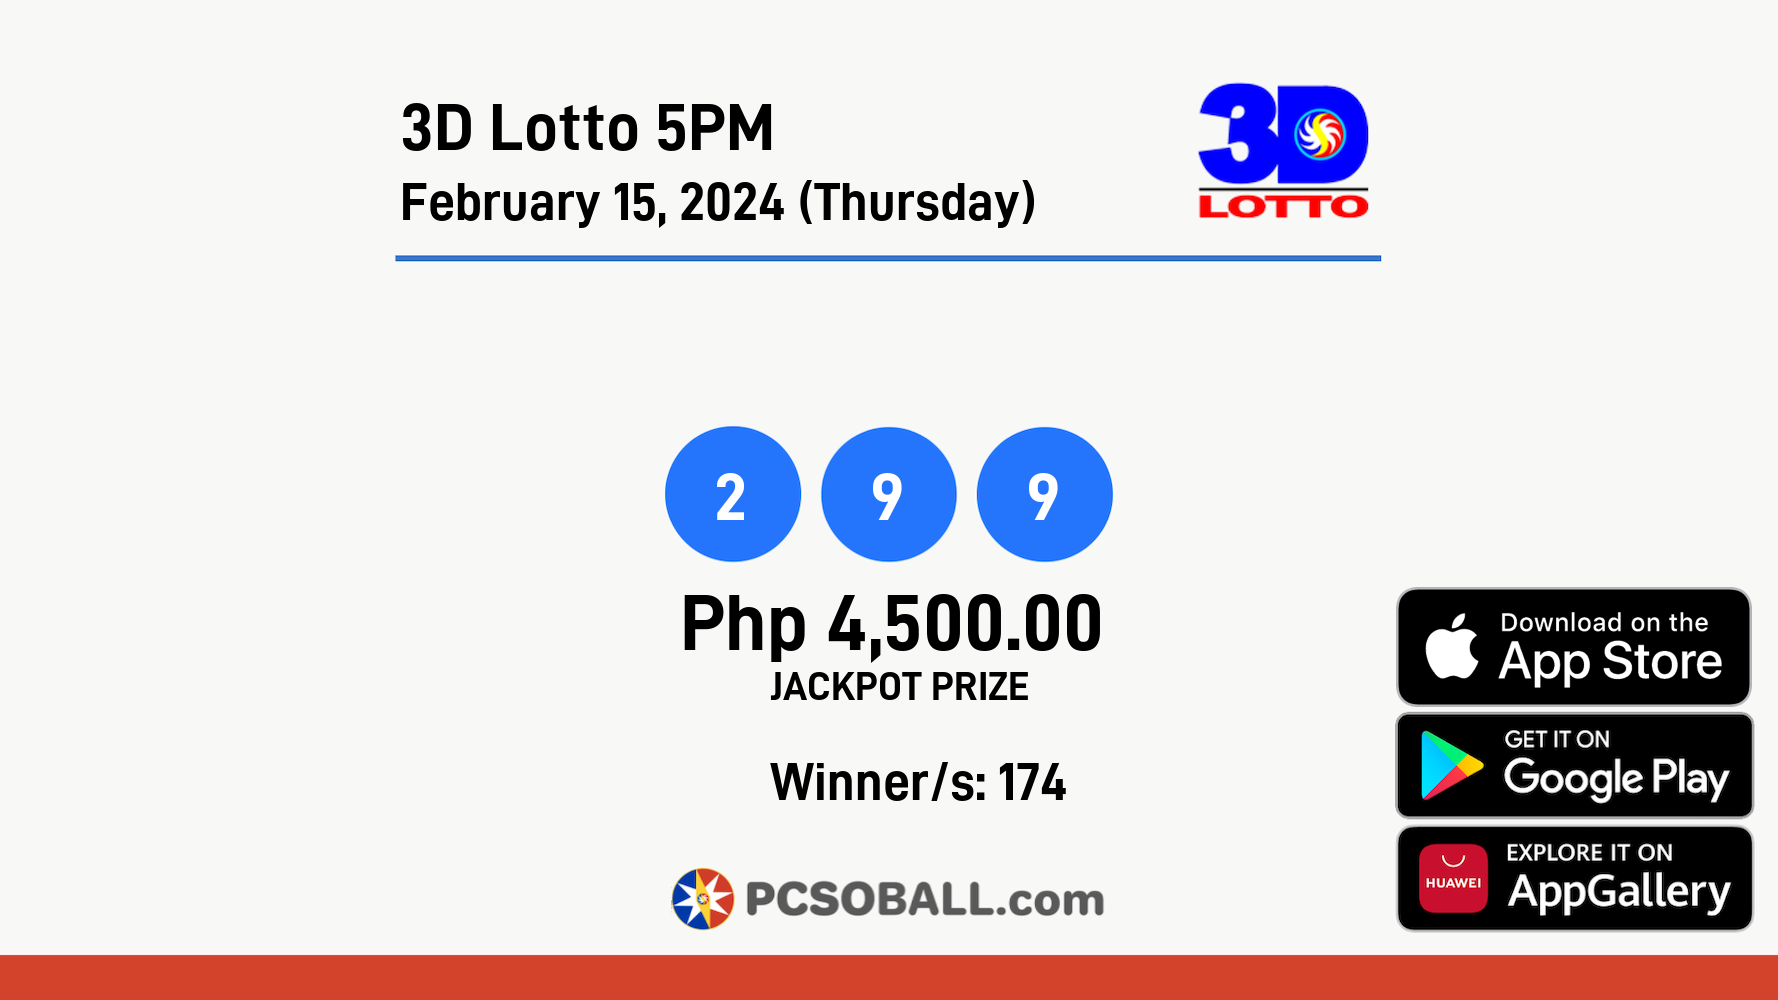 3D Lotto 5PM February 15, 2024 (Thursday) Result